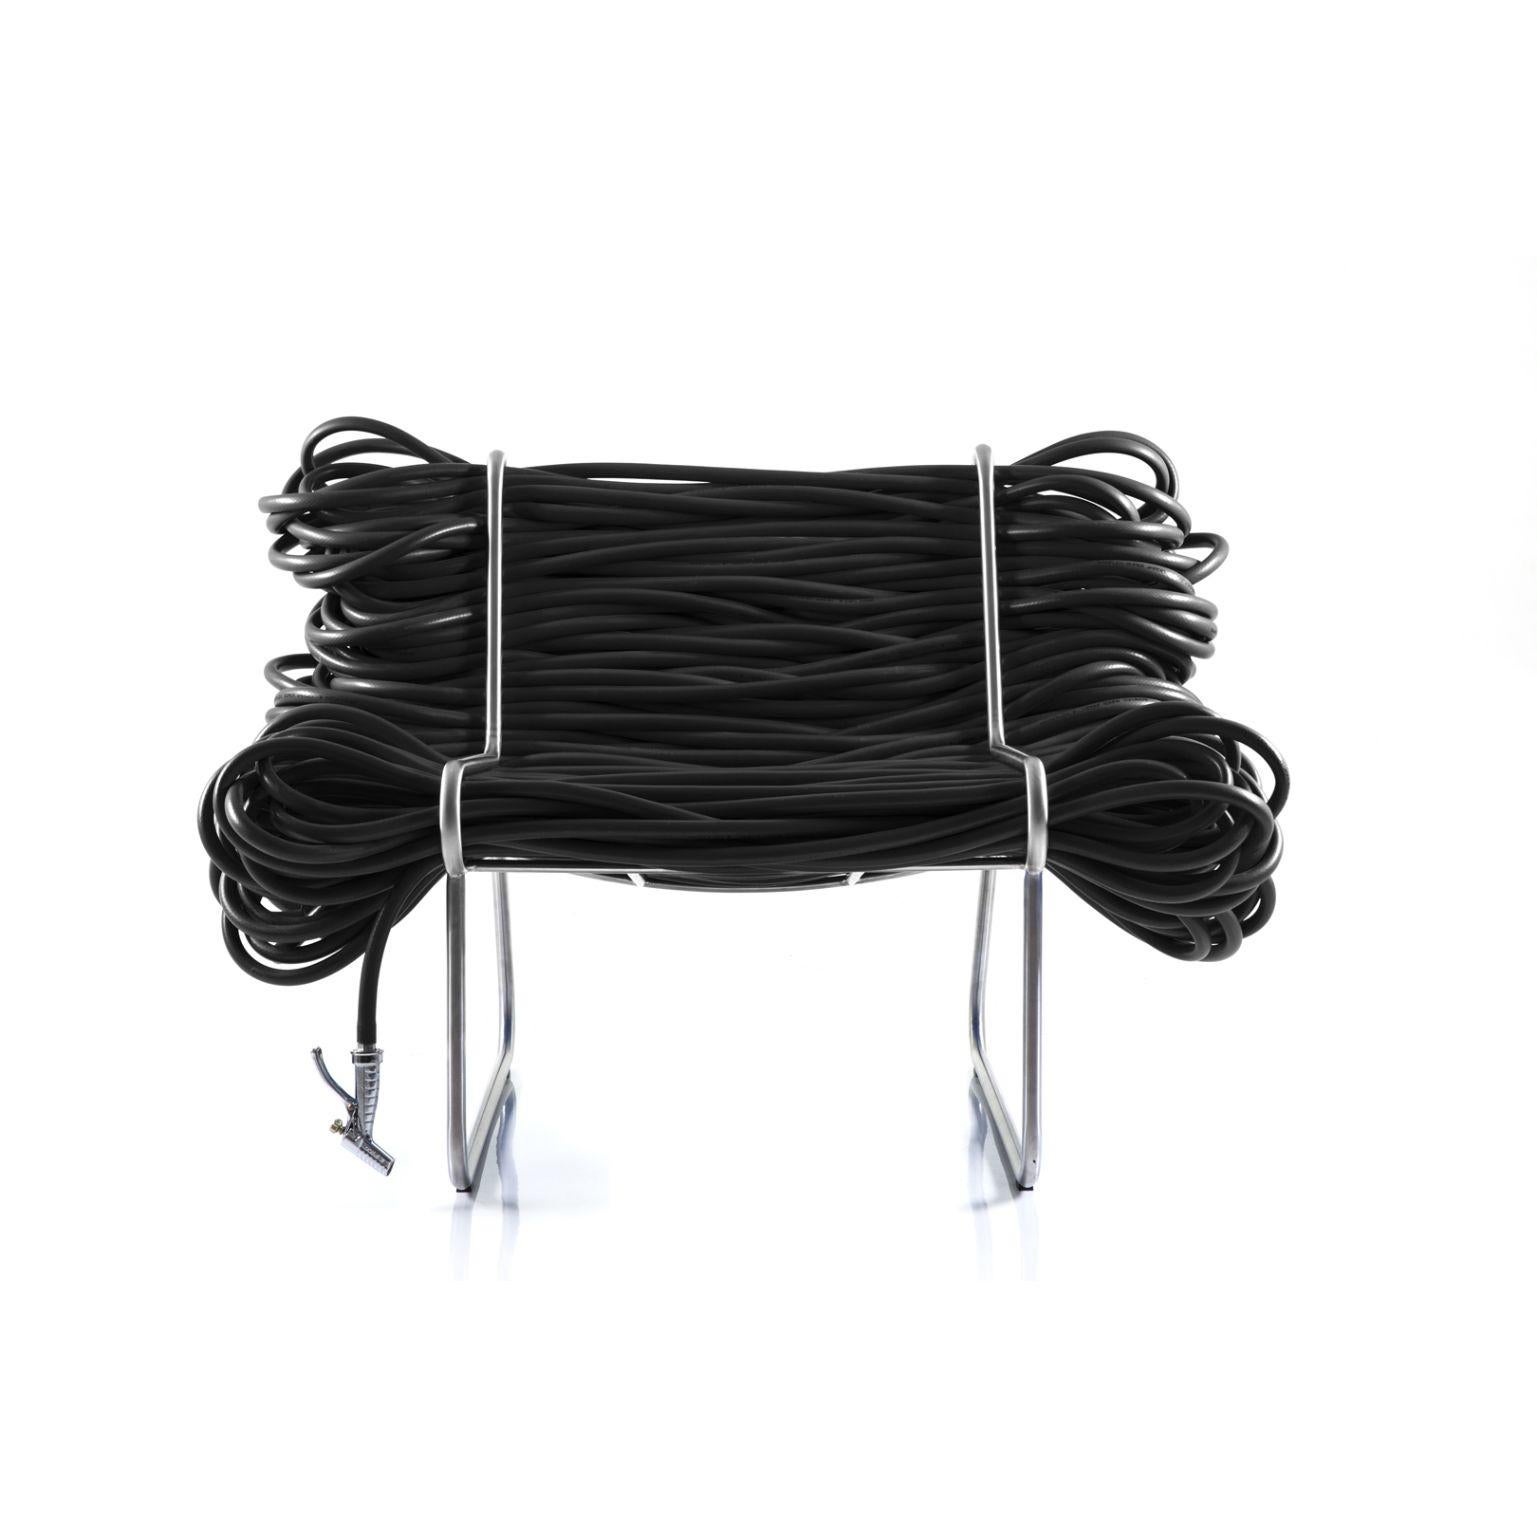 Super Jardim - black armchair by Cultivado Em Casa.
Dimensions: 105 x 80 x 73 cm.
Materials: Stainless steel, PVC hose, nozzle and faucet.

Also available: Green, red, blue, yellow.

Using a 200-meter continuous garden hose, with a faucet at